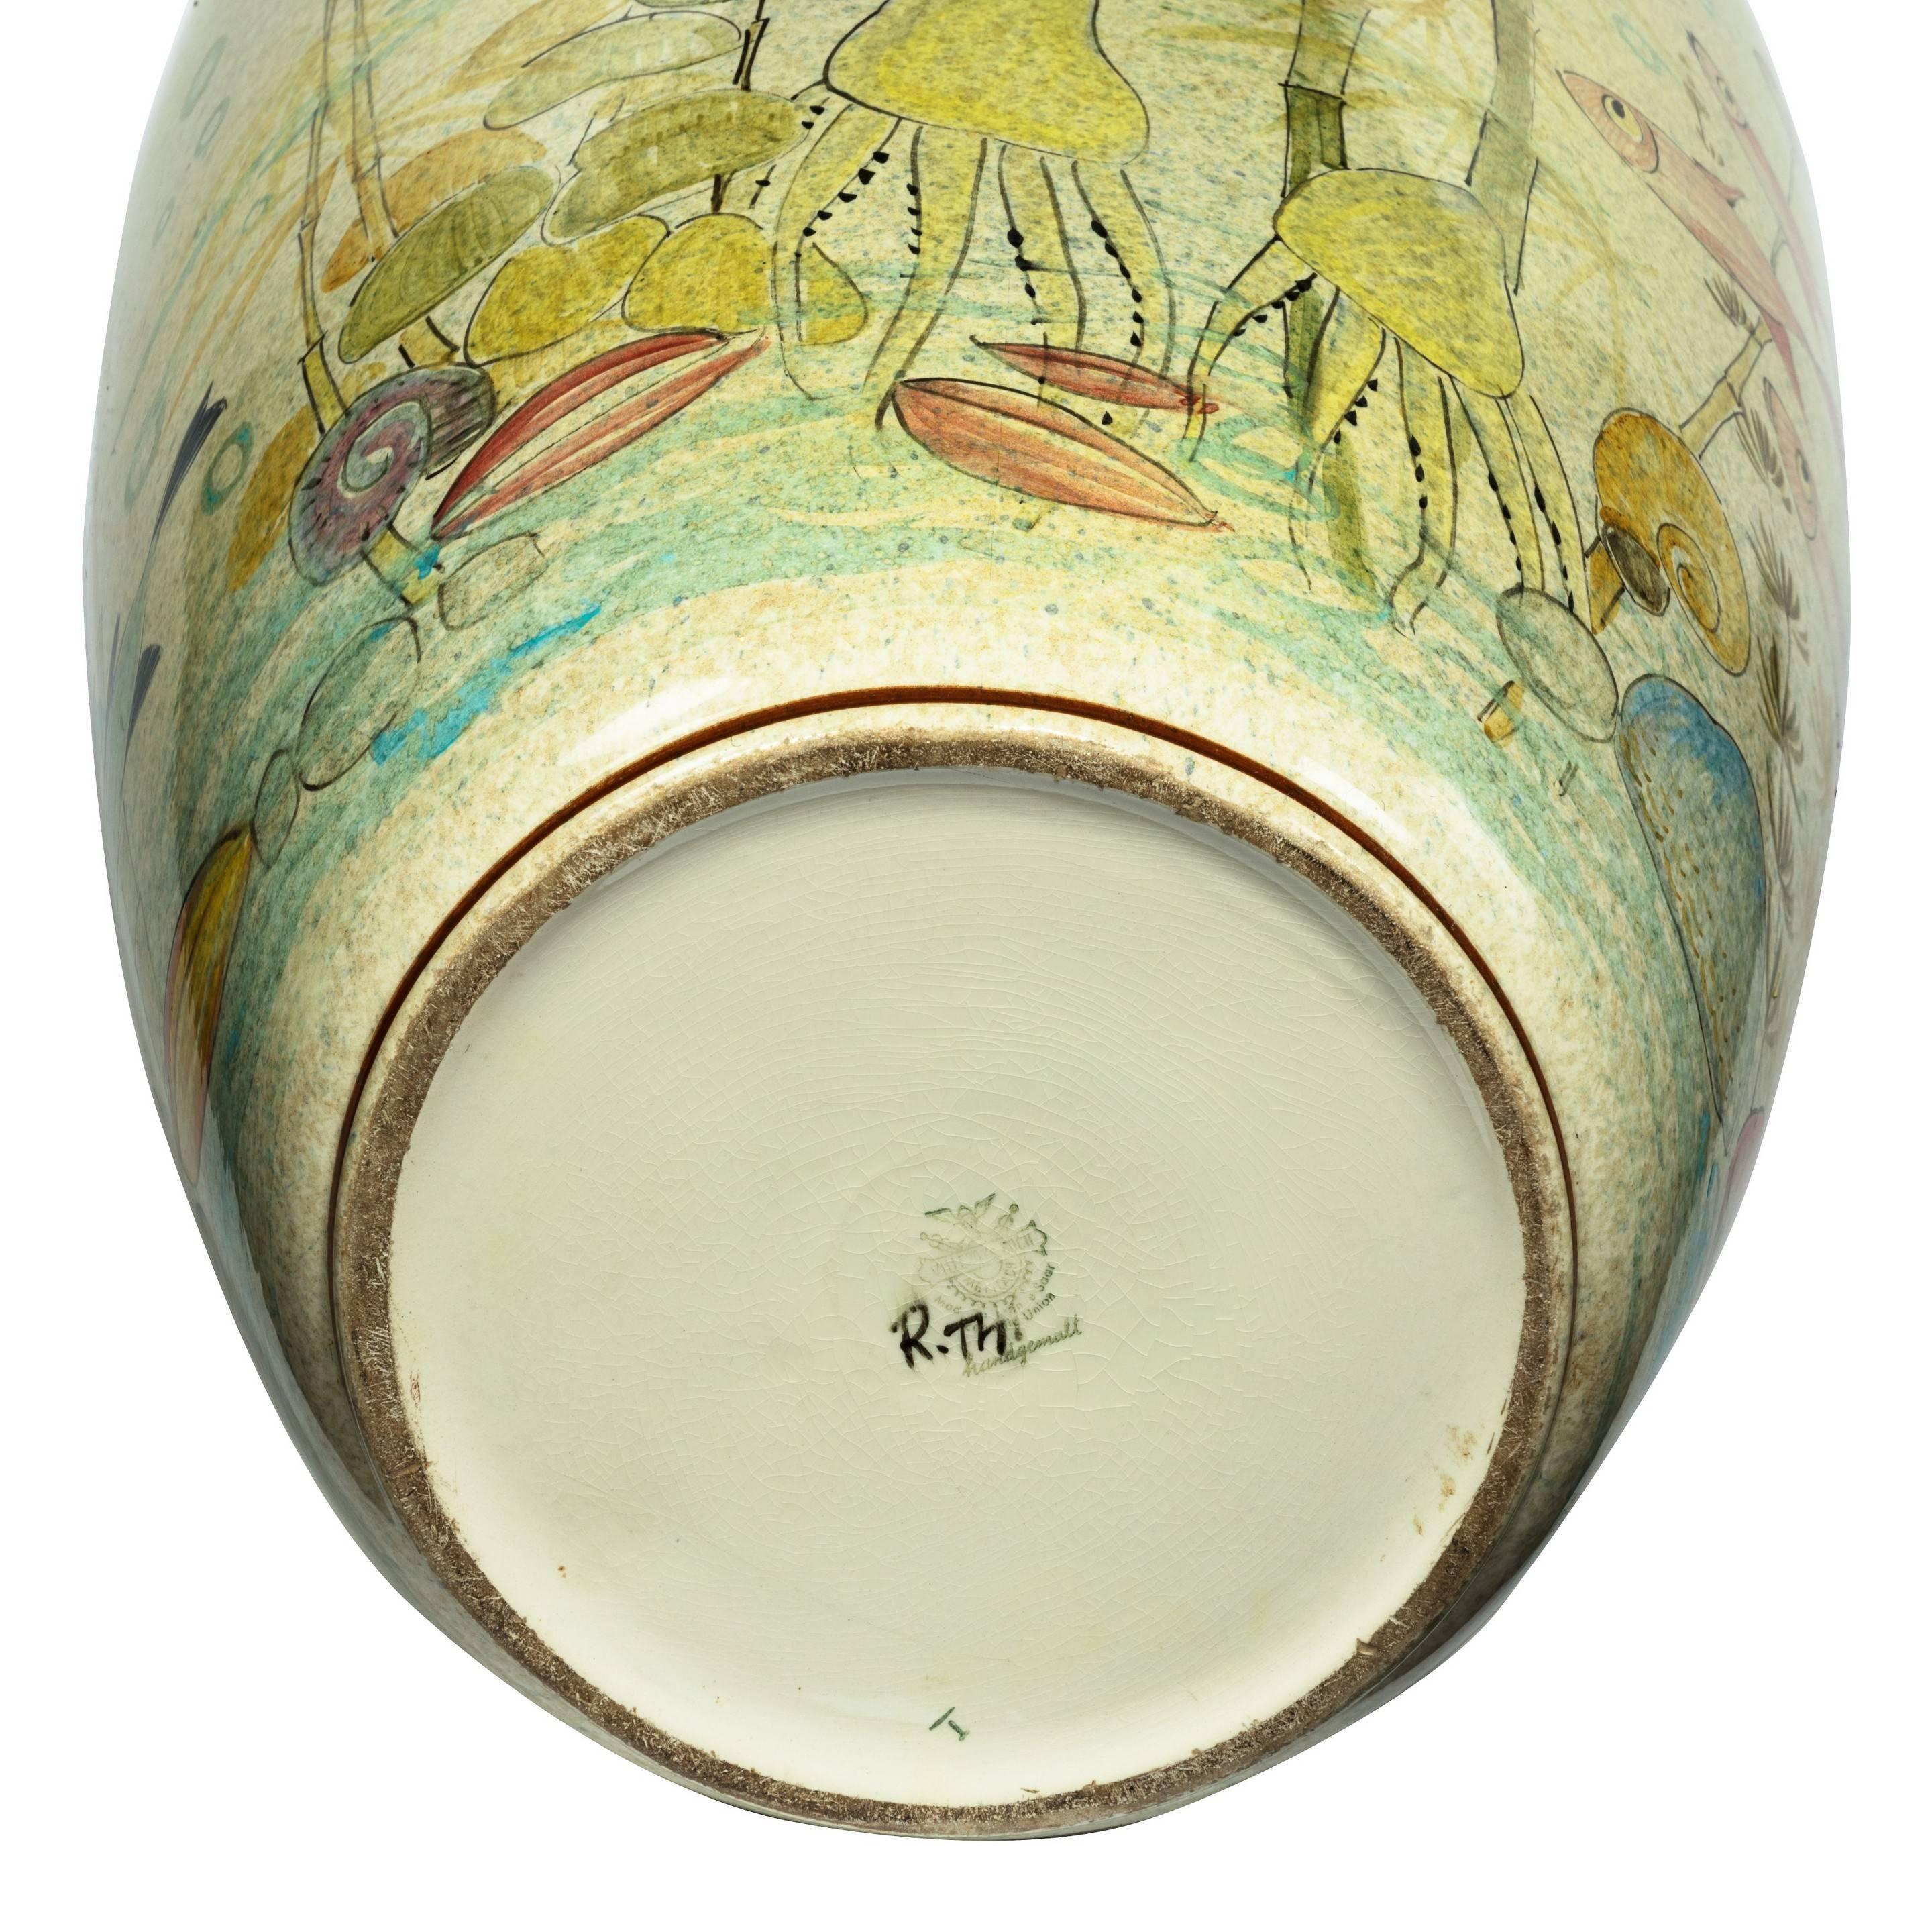 A rare and unusual hand-painted floor vase by Villeroy & Boch, 

The ovoid body naively painted with fish, shells, octopus and sea horses in an underwater seascape, stamped ‘Villeroy & Boch, Mettlach, made in France-Saar Economic Union’ and